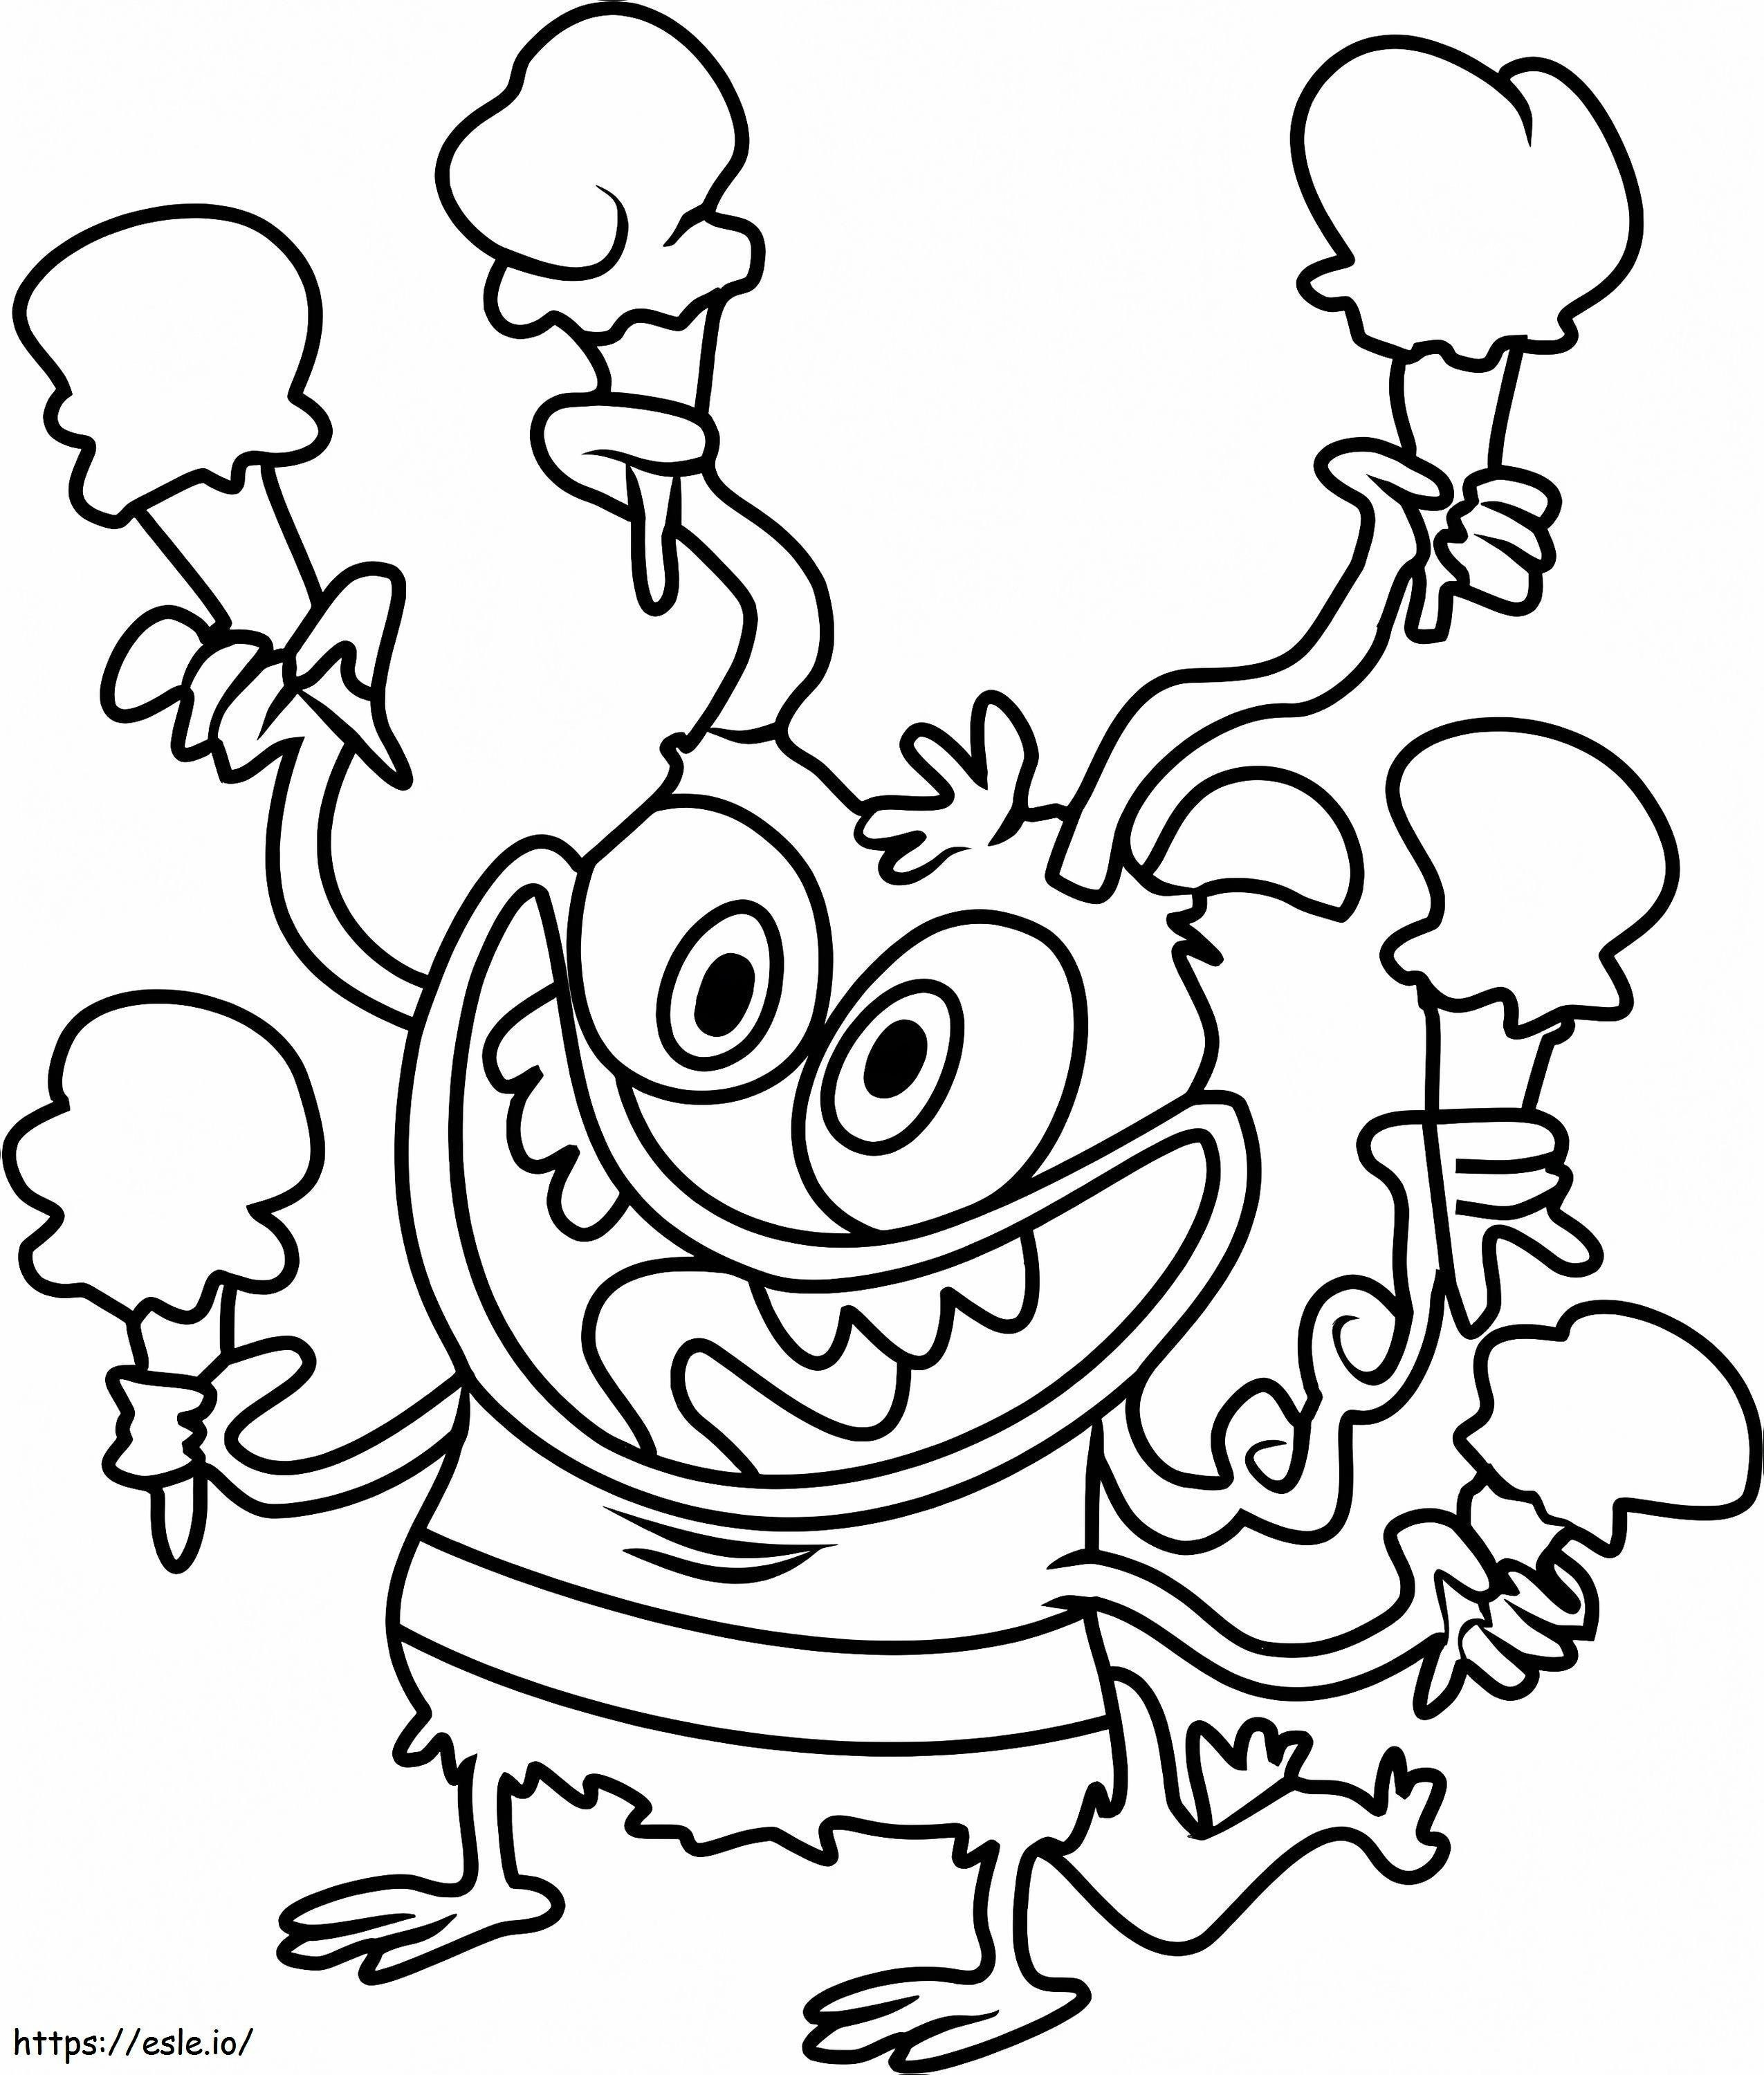 Bunsen Holding Six Ice Cream Cones coloring page